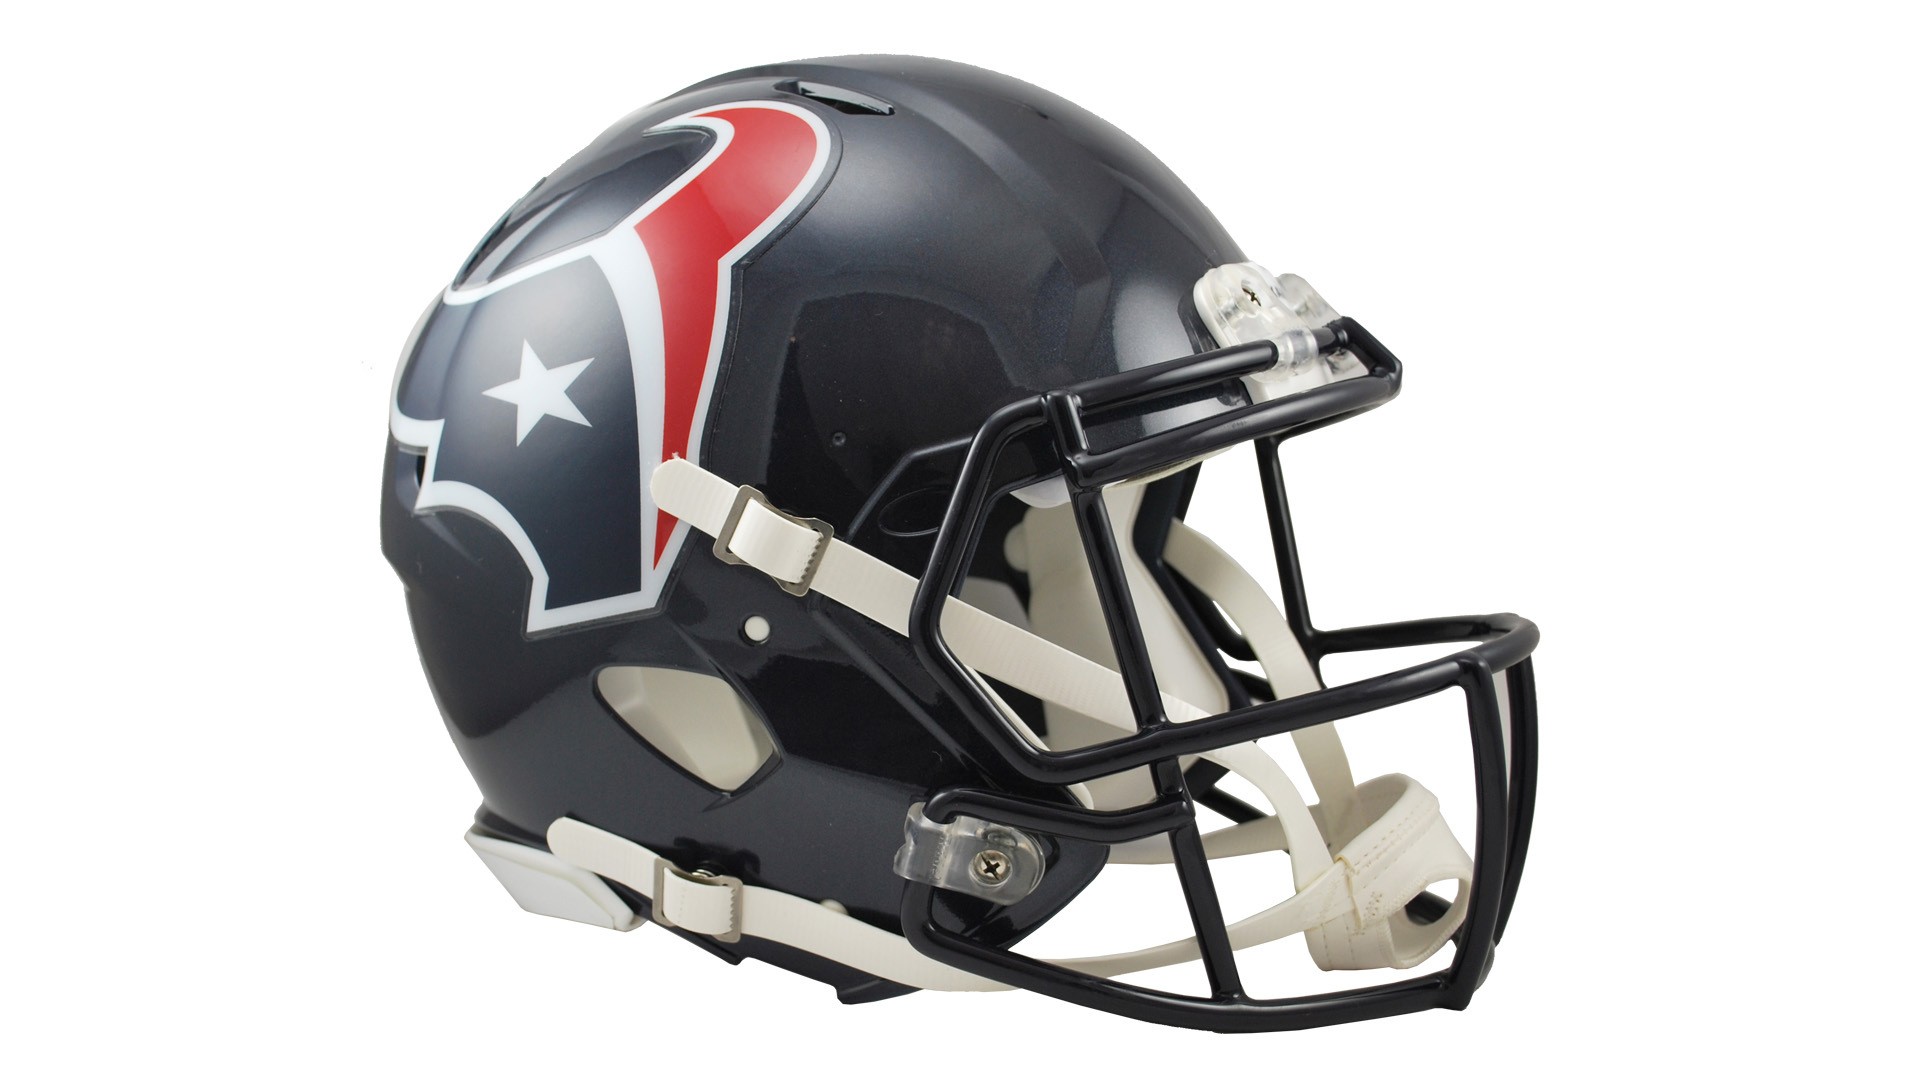 PC Wallpaper Houston Texans With high-resolution 1920X1080 pixel. Download and set as wallpaper for Desktop Computer, Apple iPhone X, XS Max, XR, 8, 7, 6, SE, iPad, Android